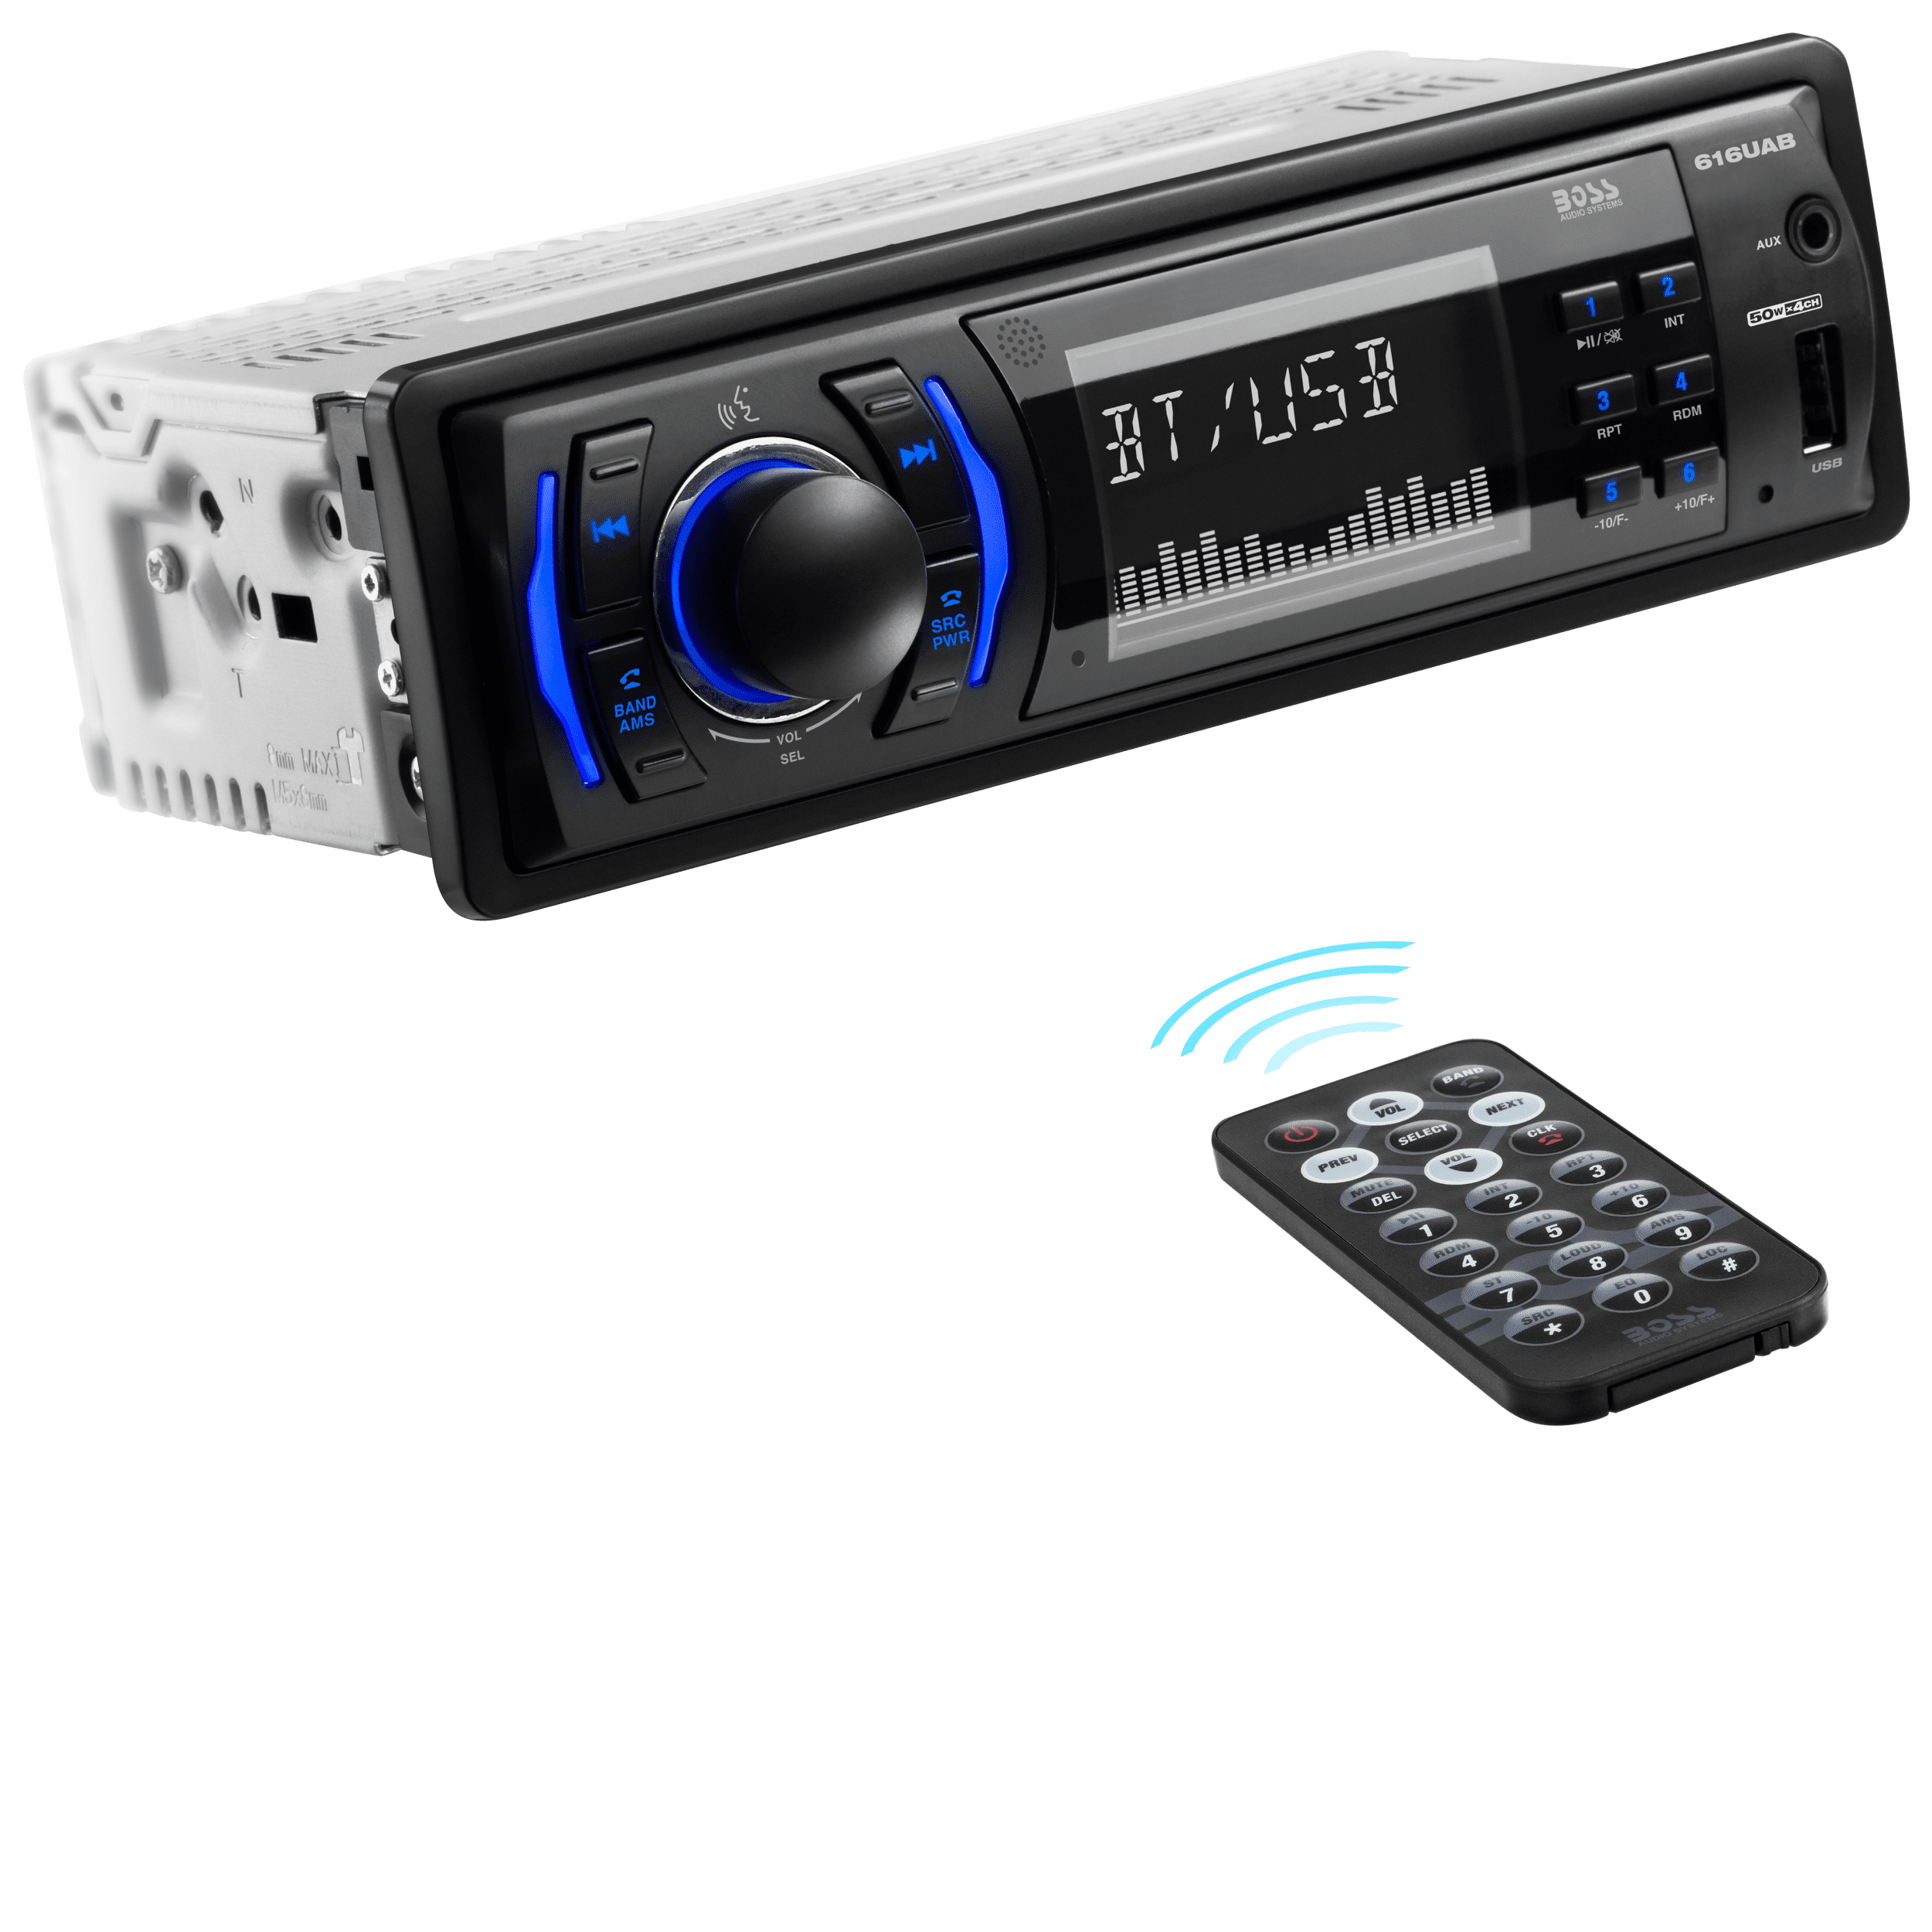 het spoor wet Hymne BOSS Audio Systems 616UAB Car Audio Stereo System - Single Din, Bluetooth  Audio and Calling Head Unit, MP3, USB, Aux-in, No CD DVD Player, AM/FM  Radio Receiver - Walmart.com